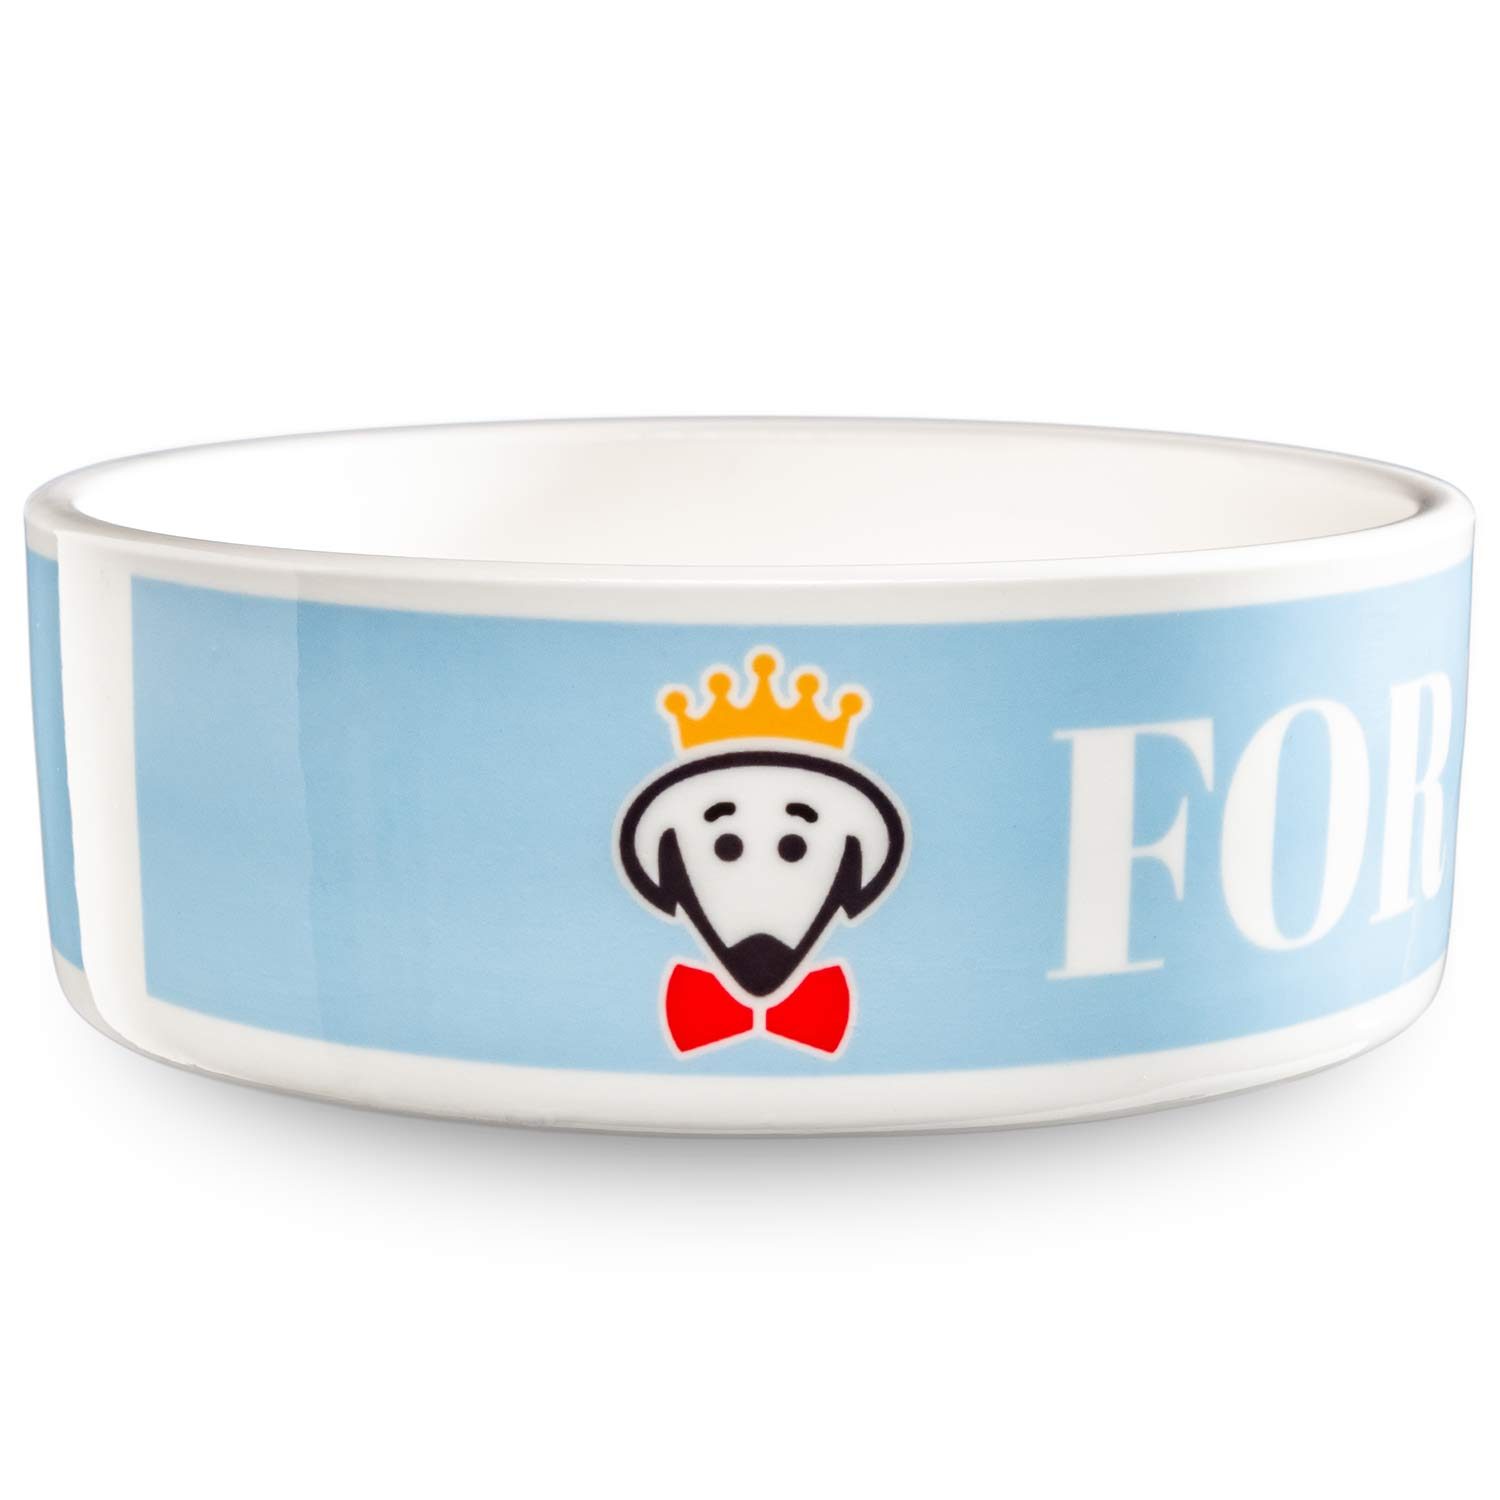 Royal Pet Bowl (Prince) in baby blue by Beau Tyler